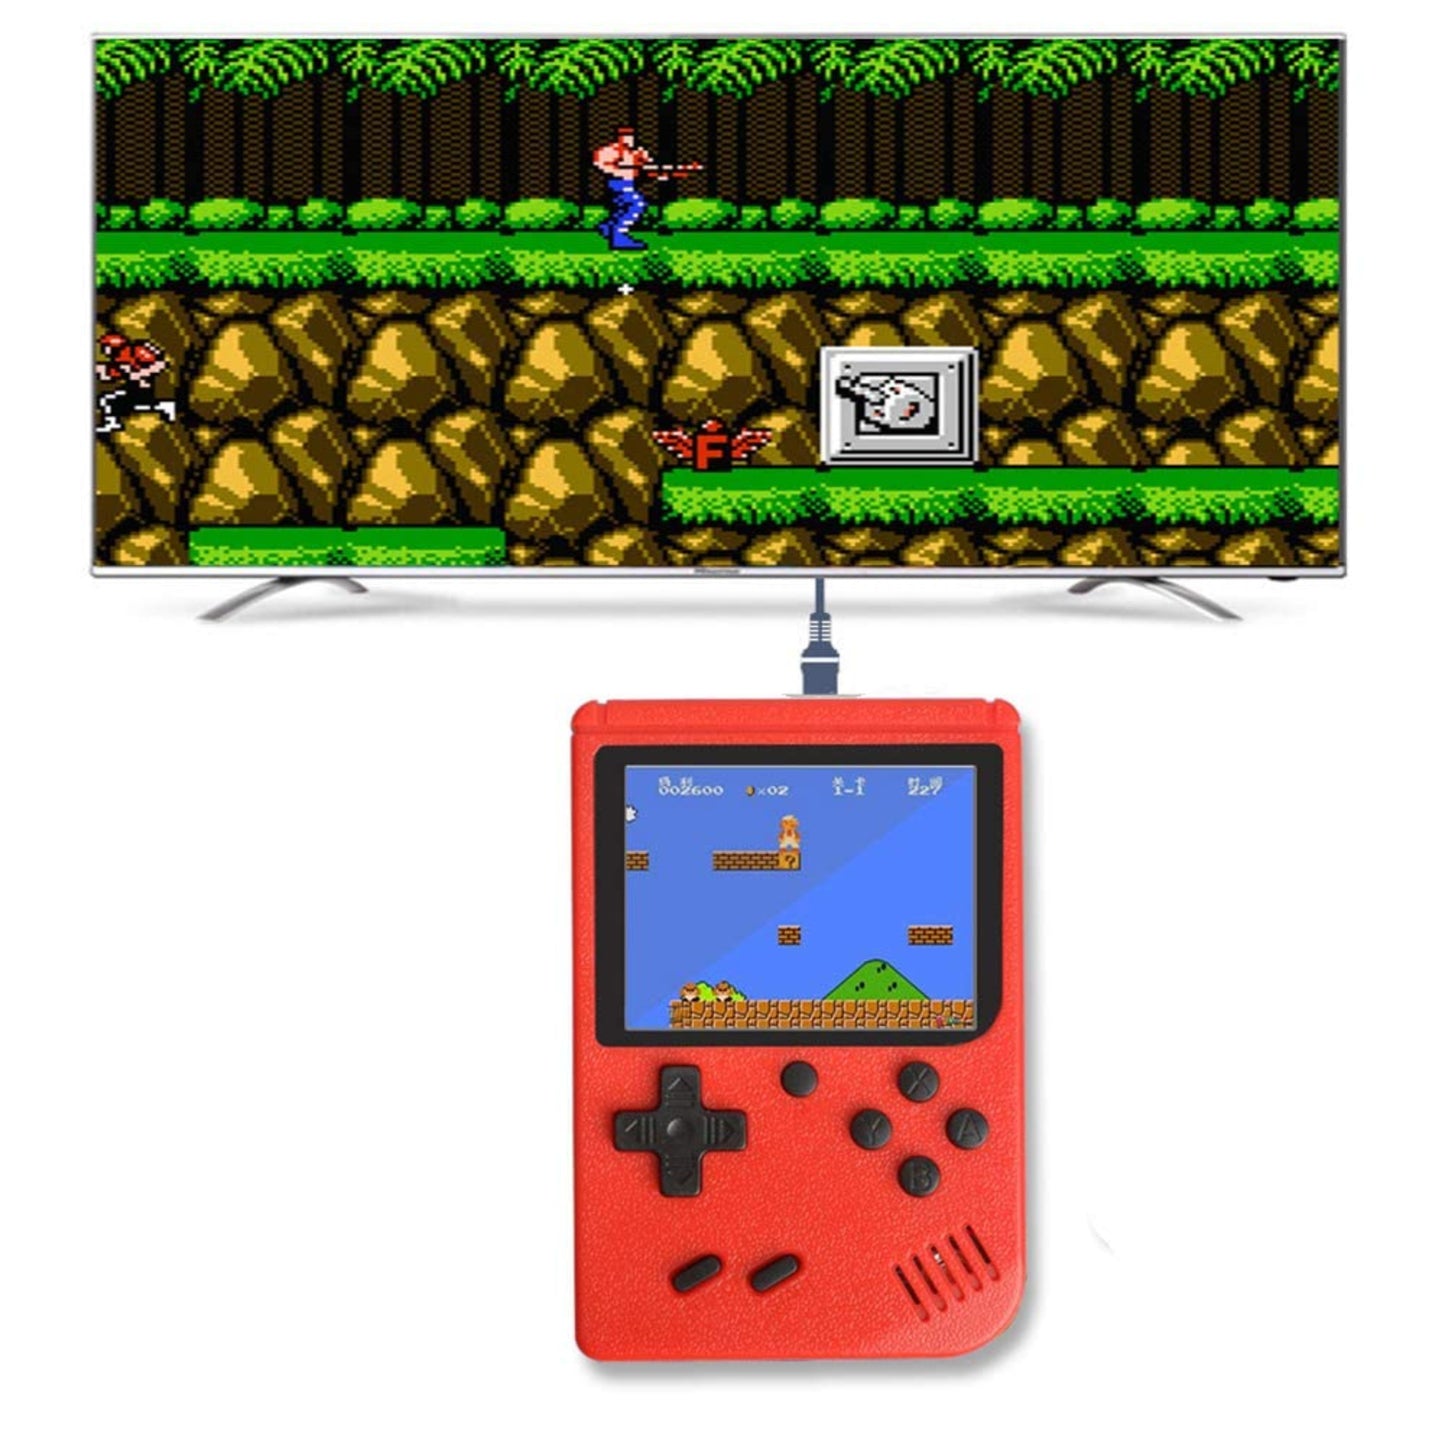 SUP 400 in 1 Portable Games with Mario,Contra games